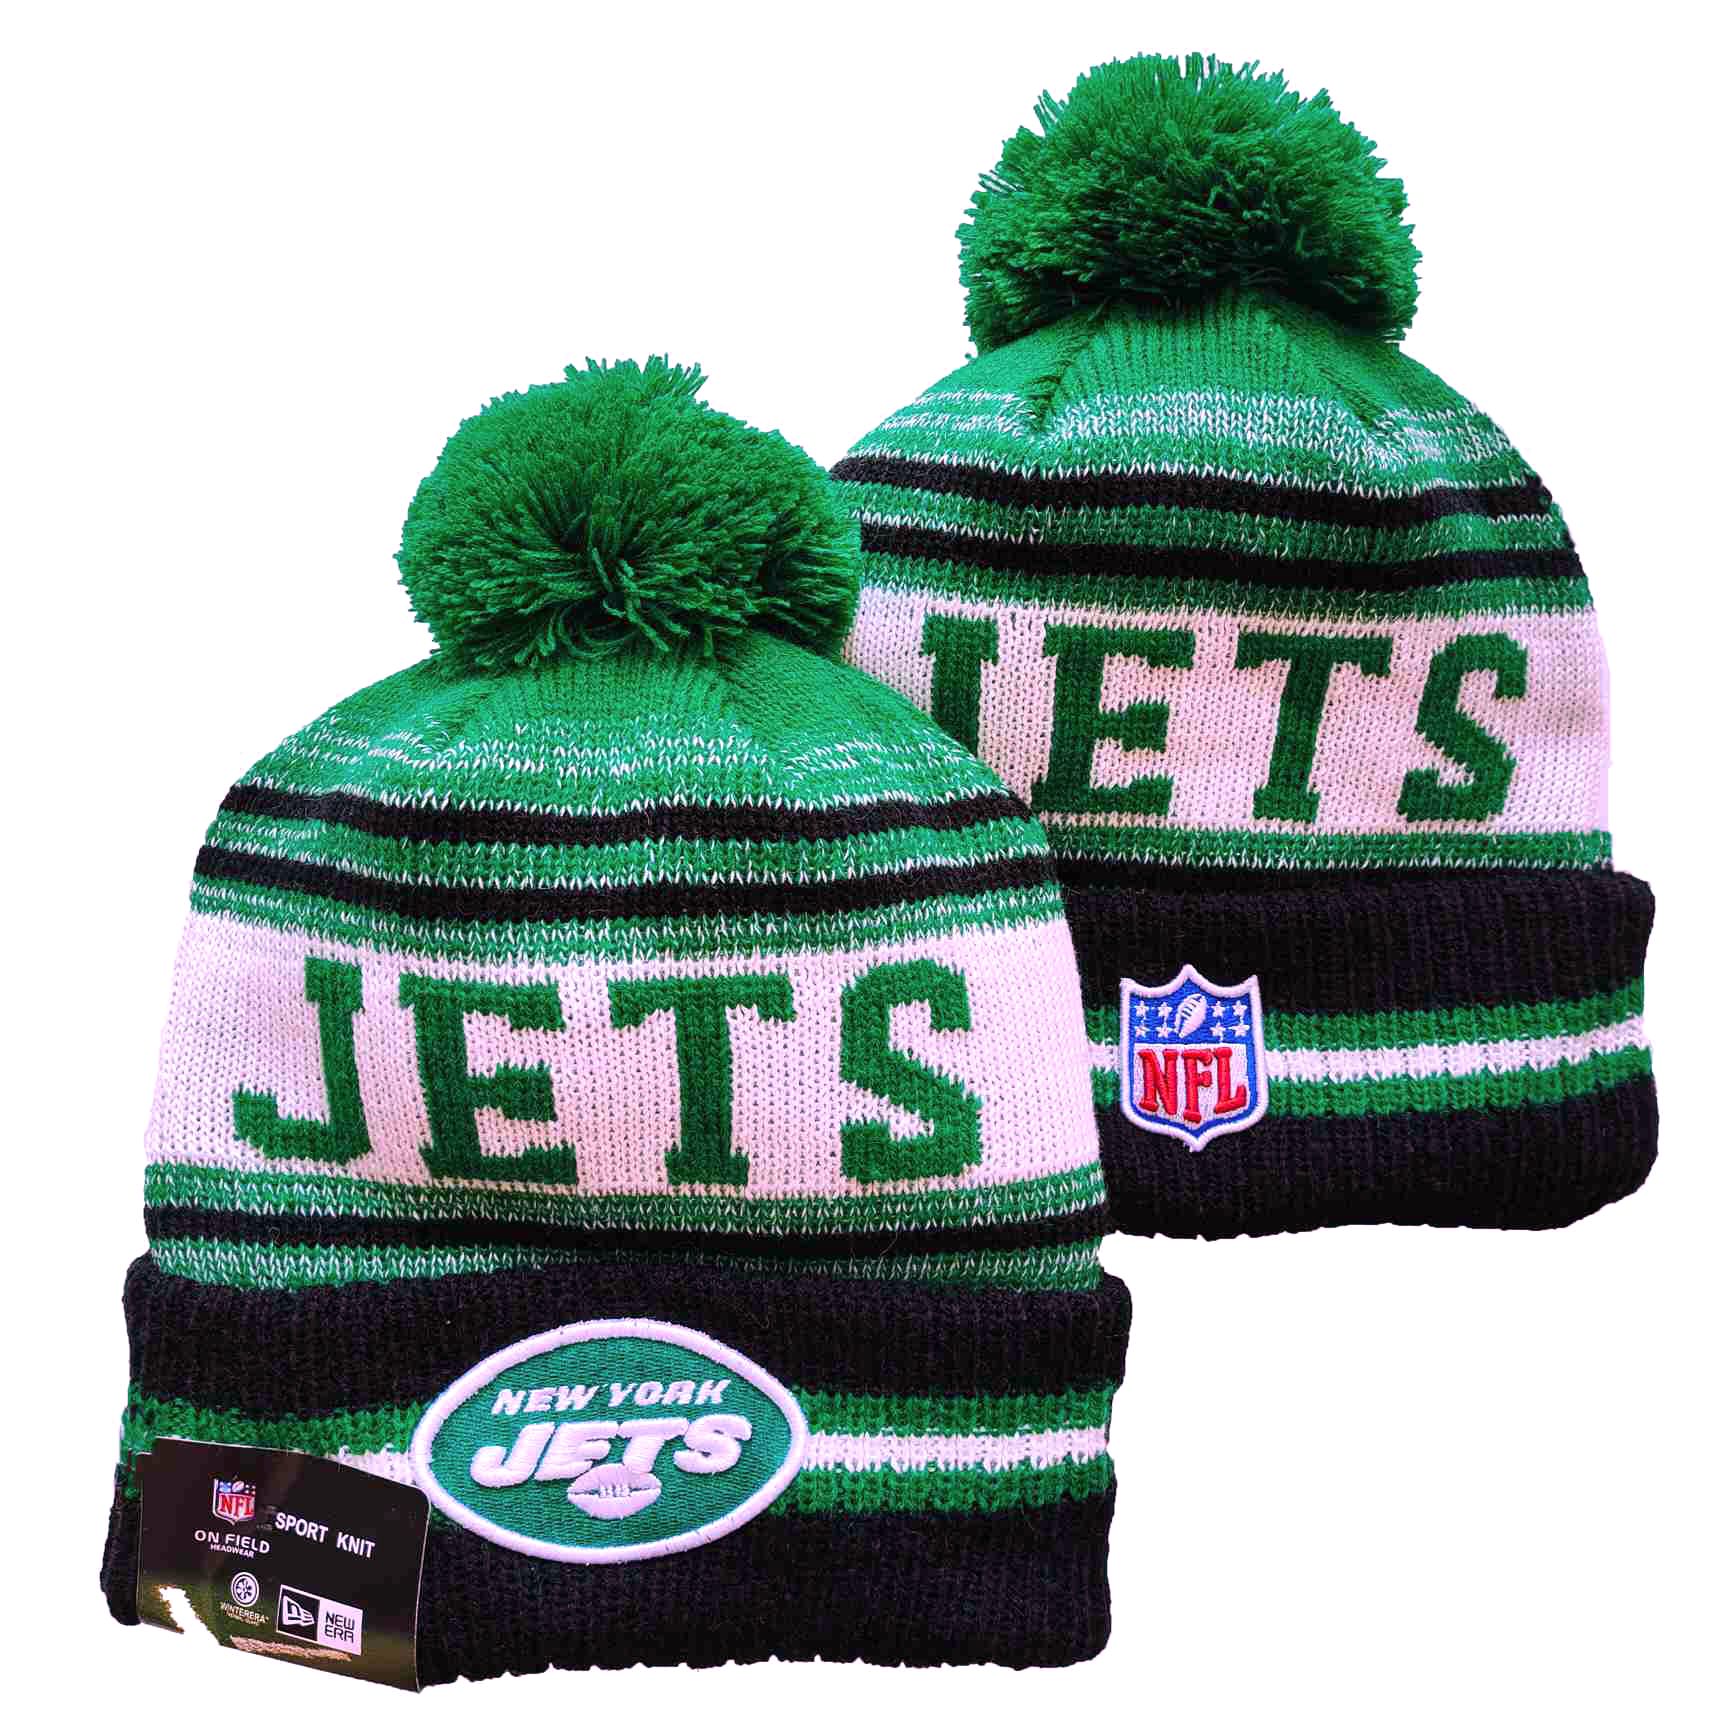 NFL New York Jets Beanies Knit Hats-YD1079